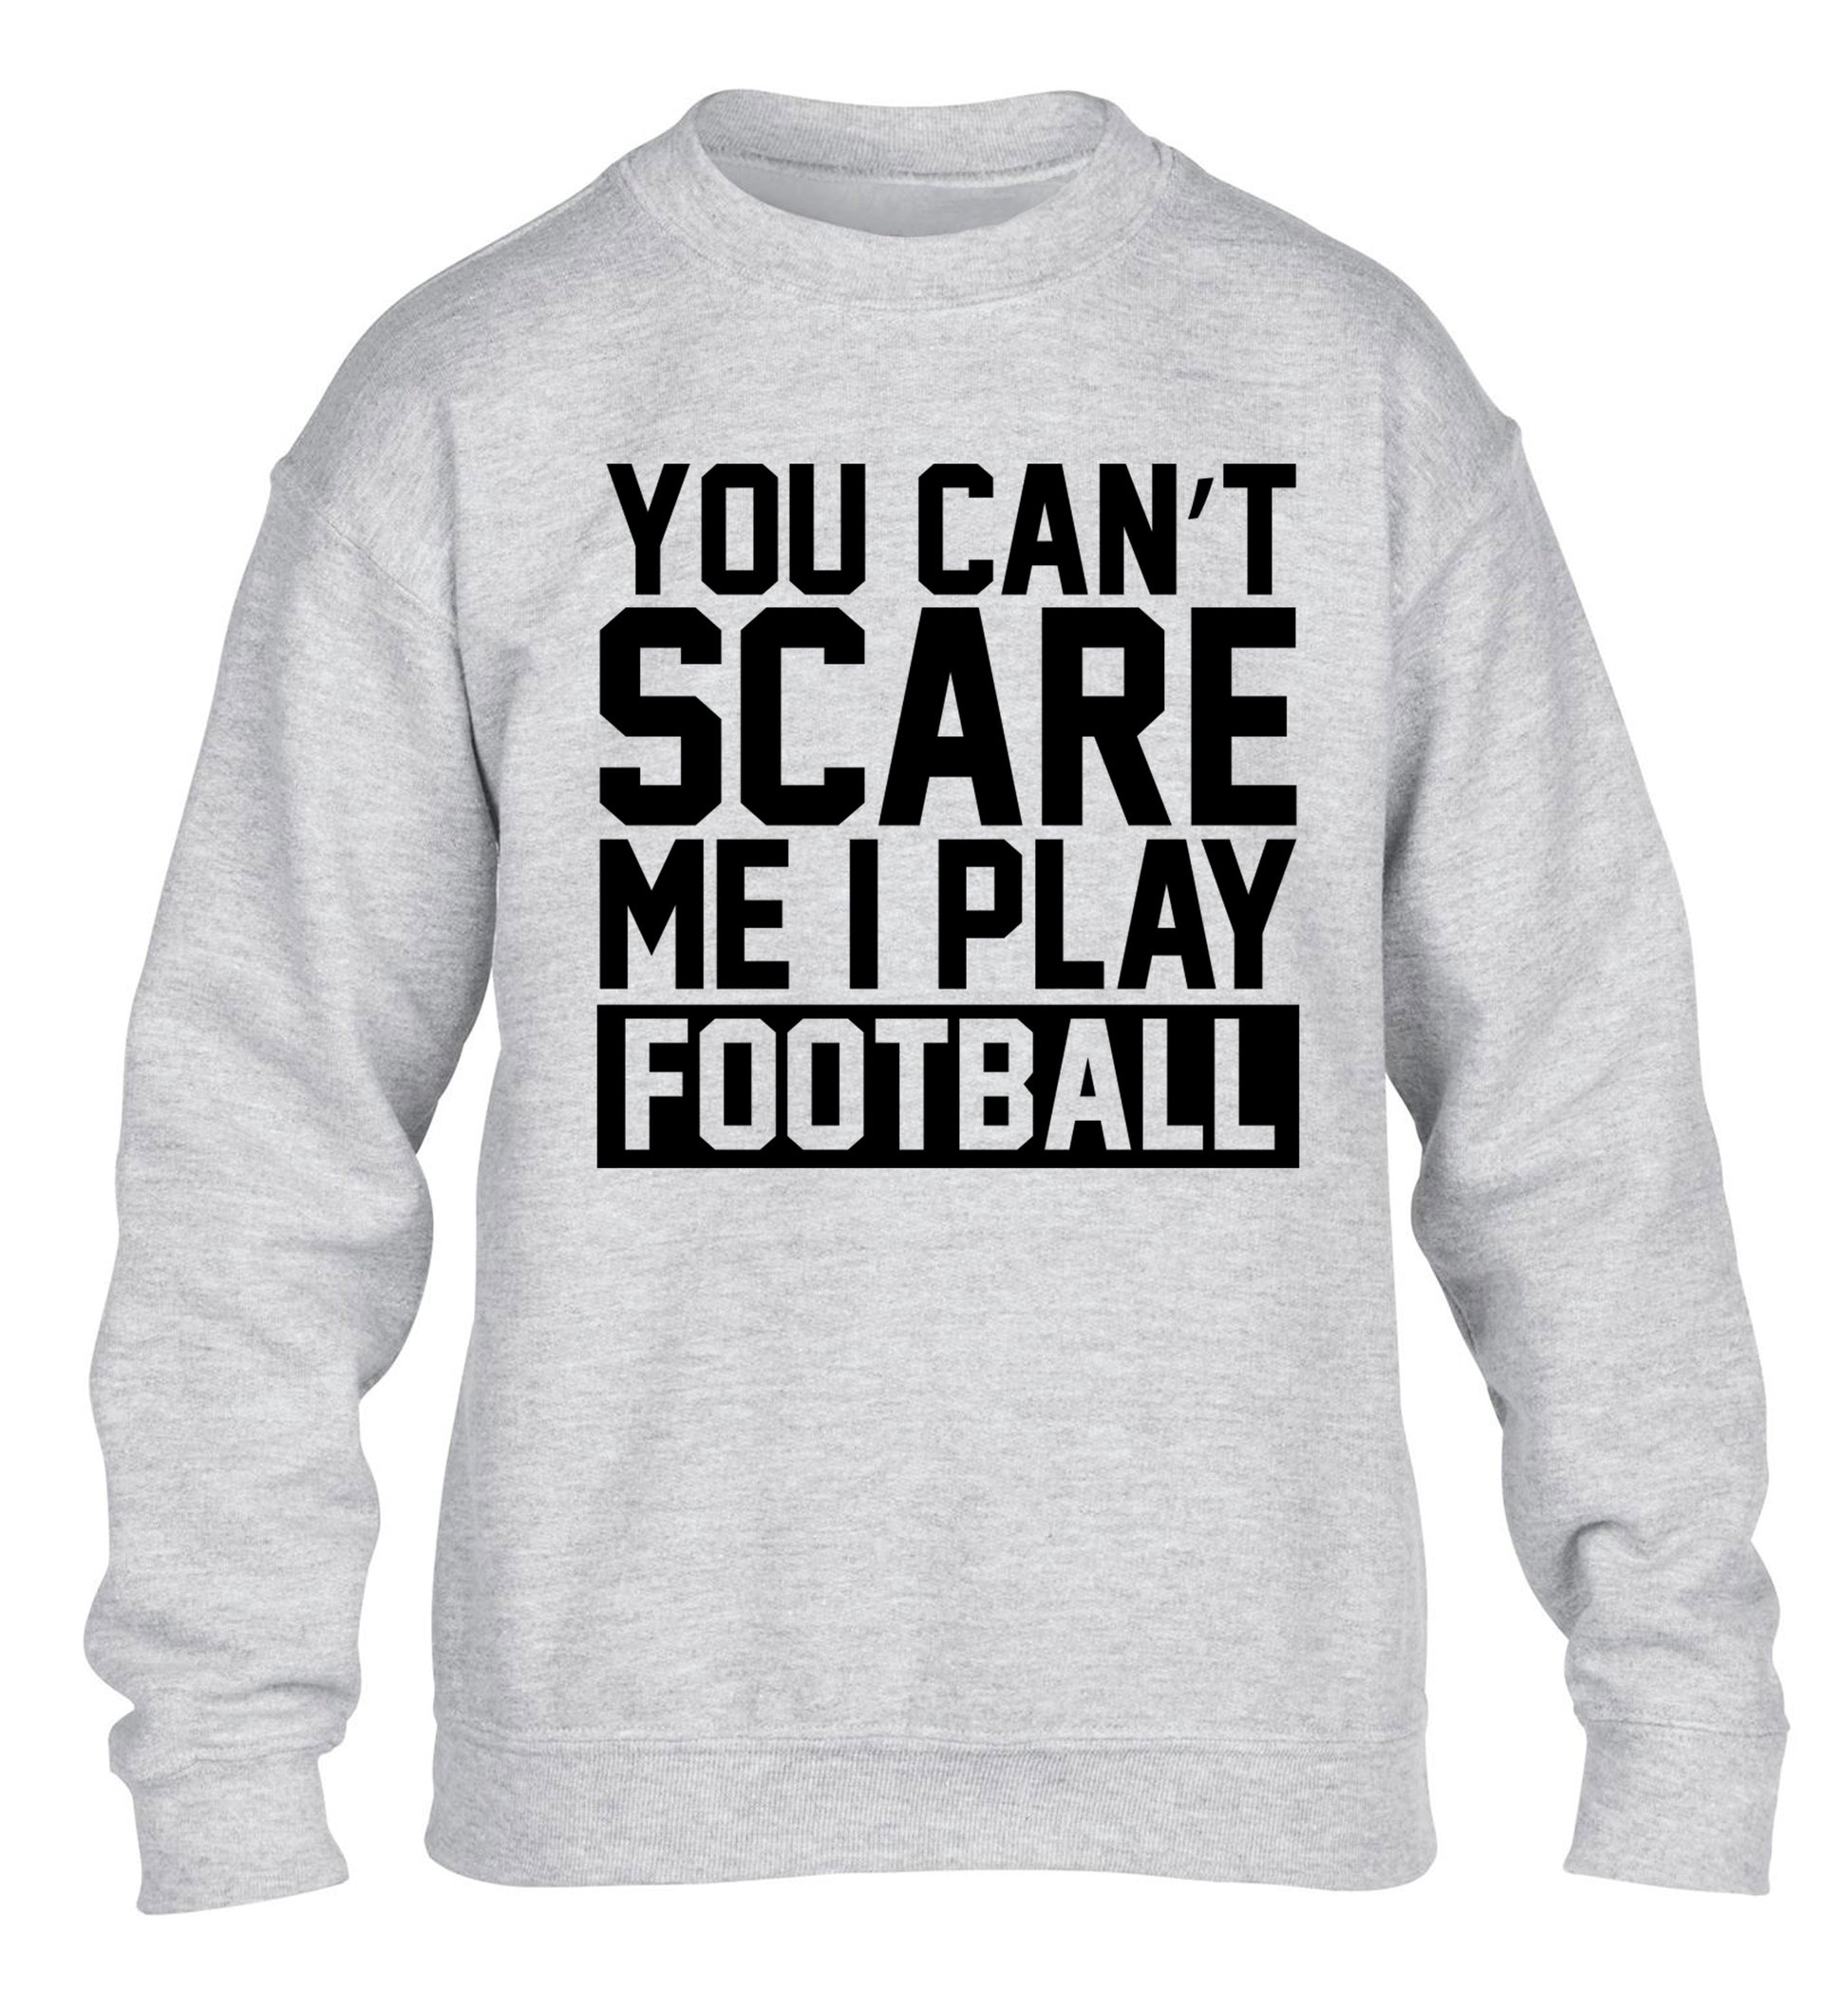 You can't scare me I play football children's grey sweater 12-14 Years